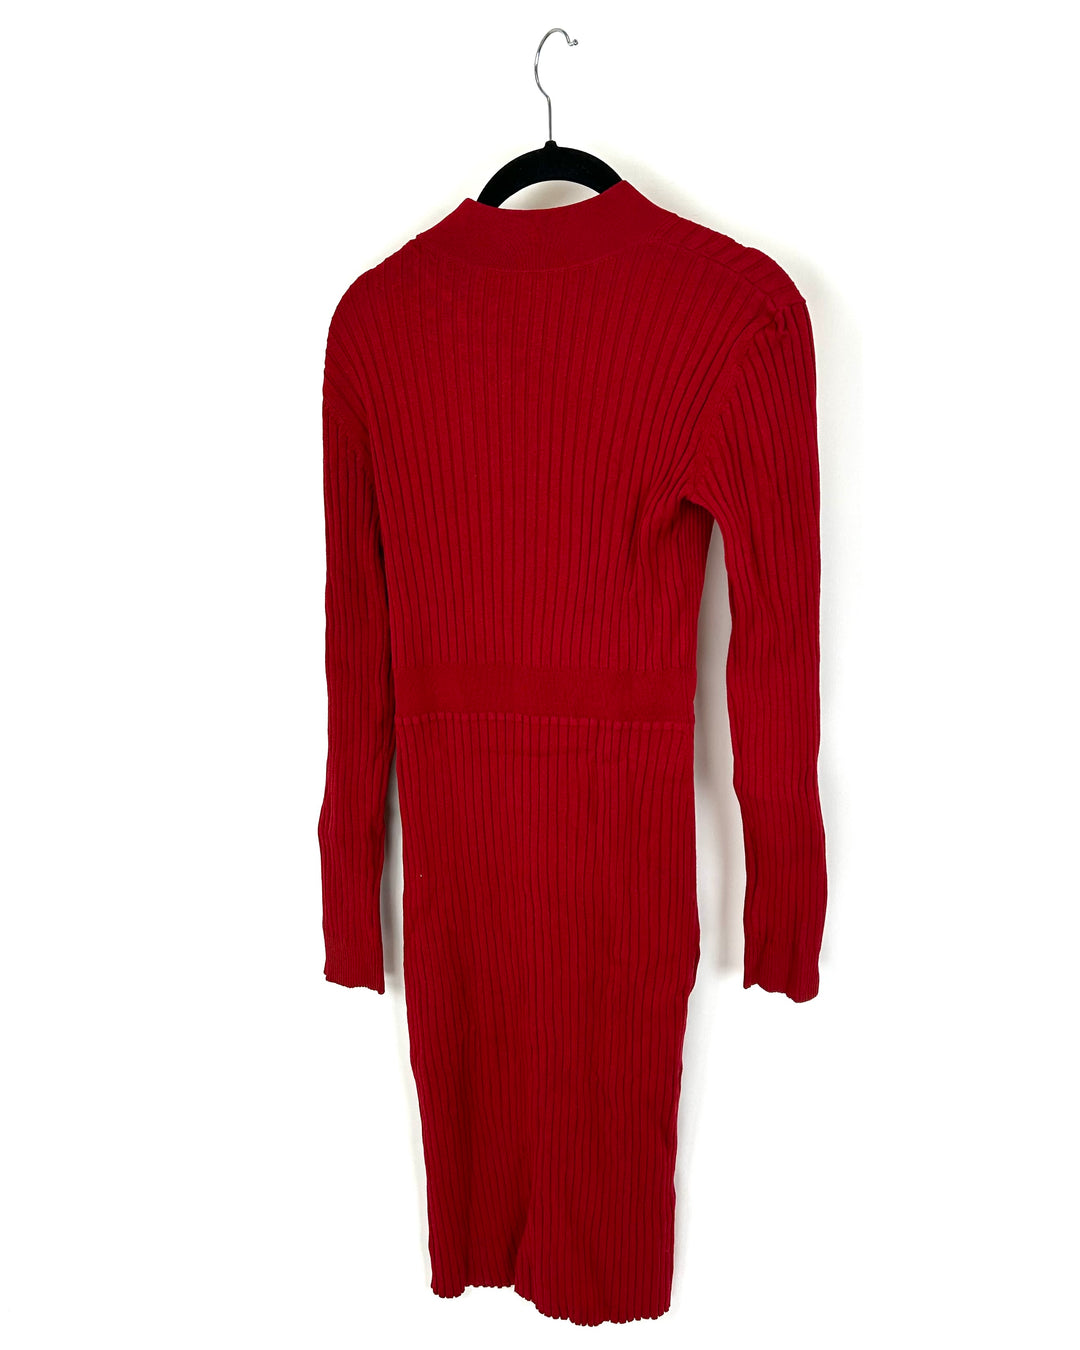 Red Fitted Ribbed Dress - Size 4/6